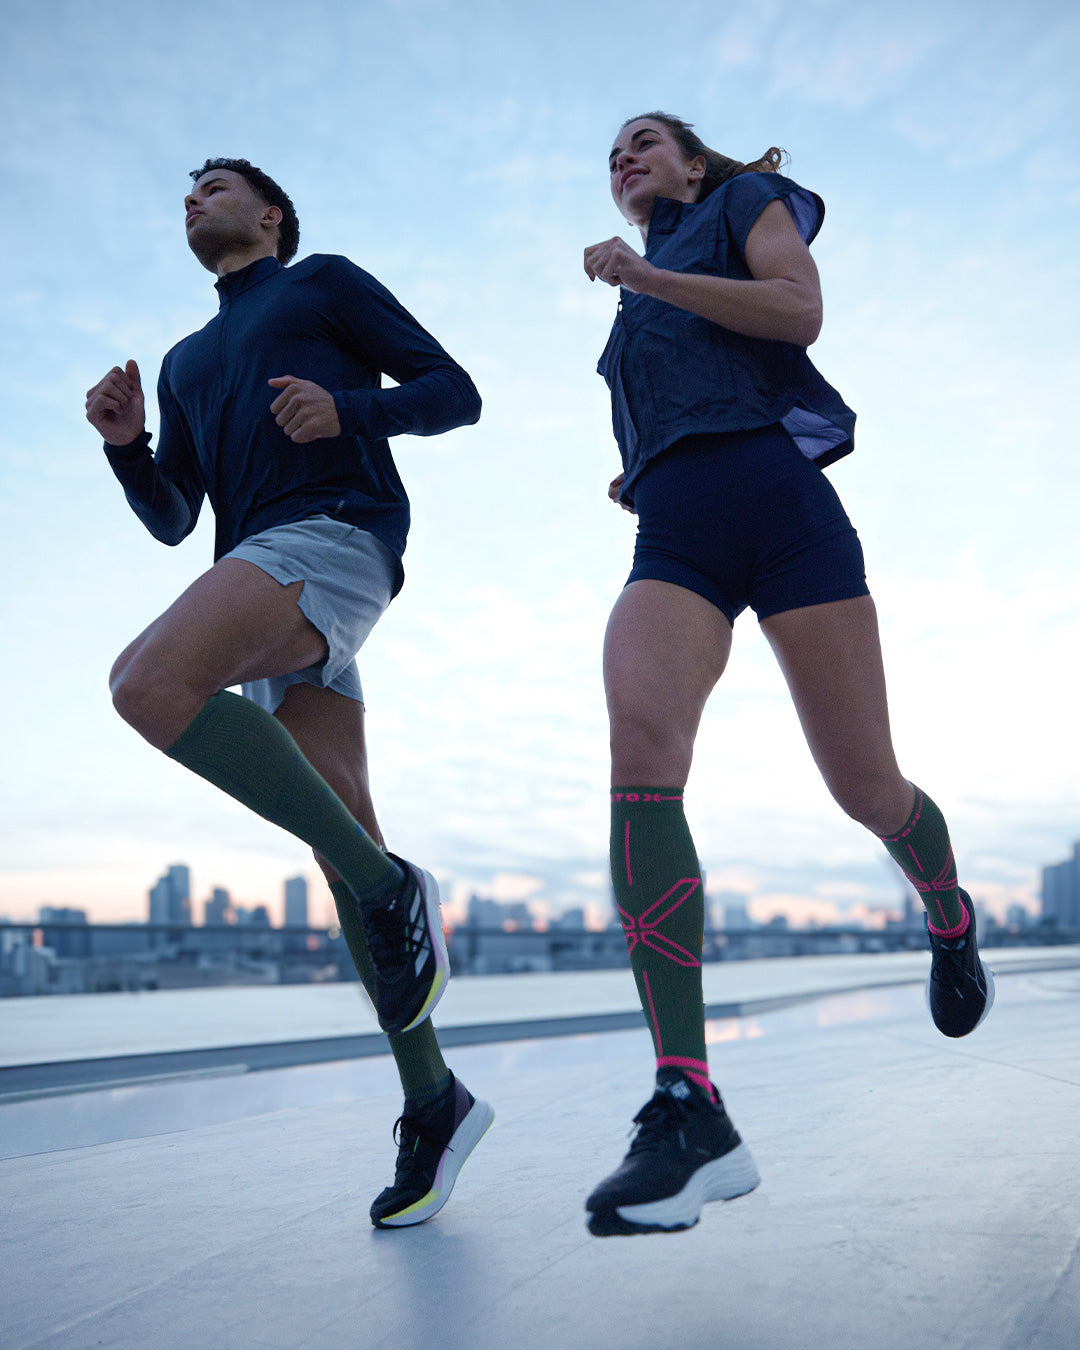 Men running on sand with compression socks.